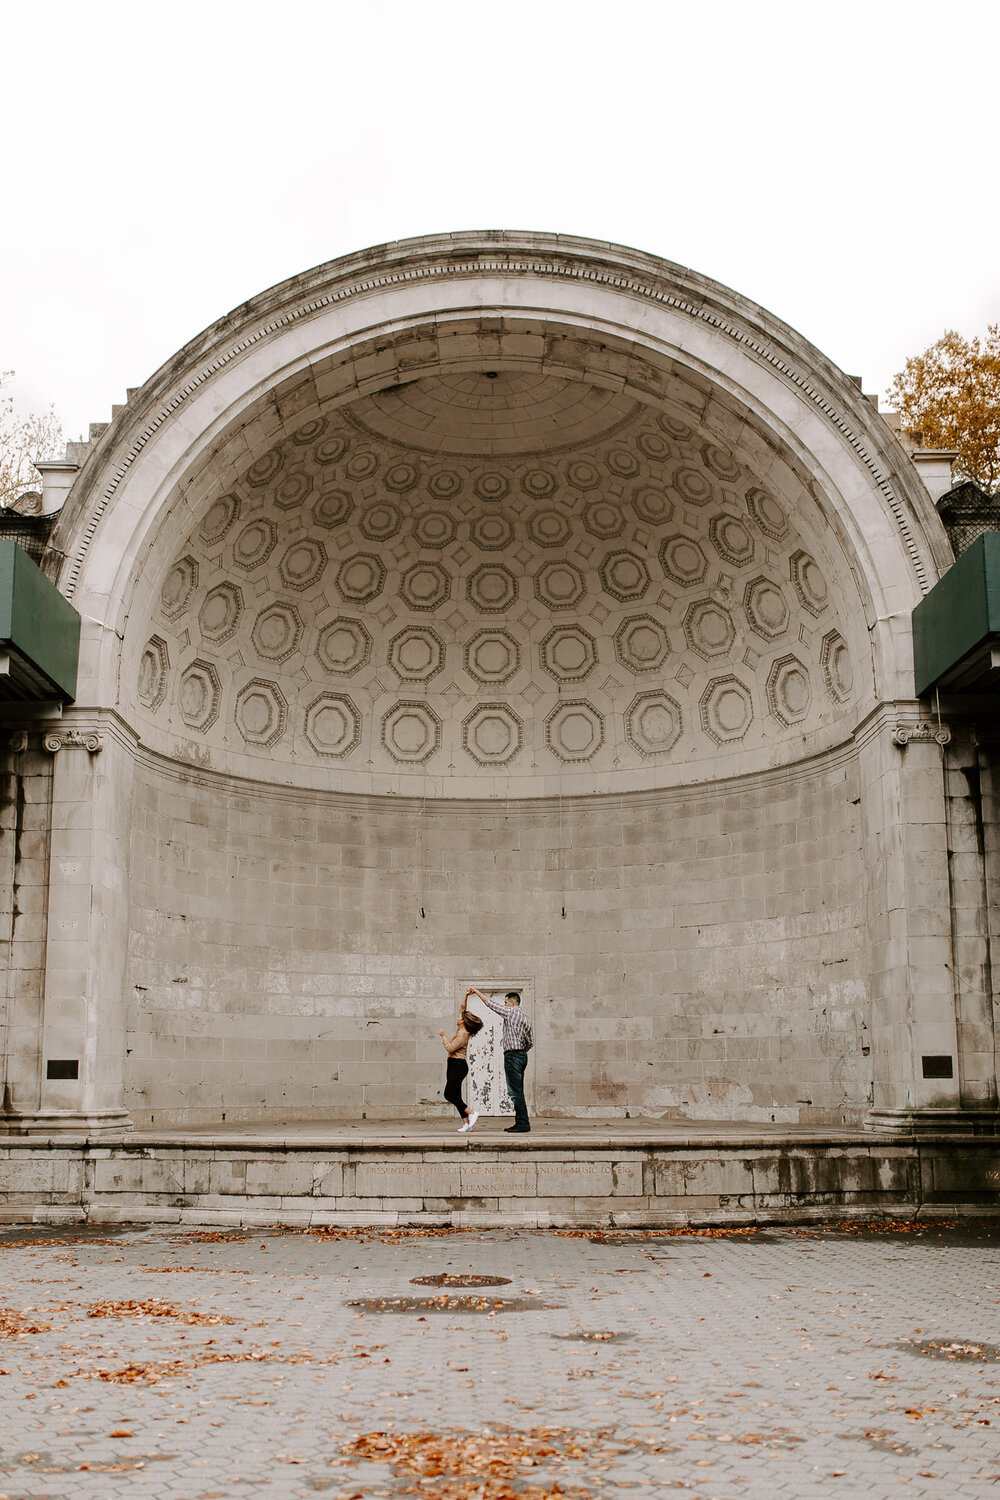 Central Park Fall Engagement by Kara McCurdy